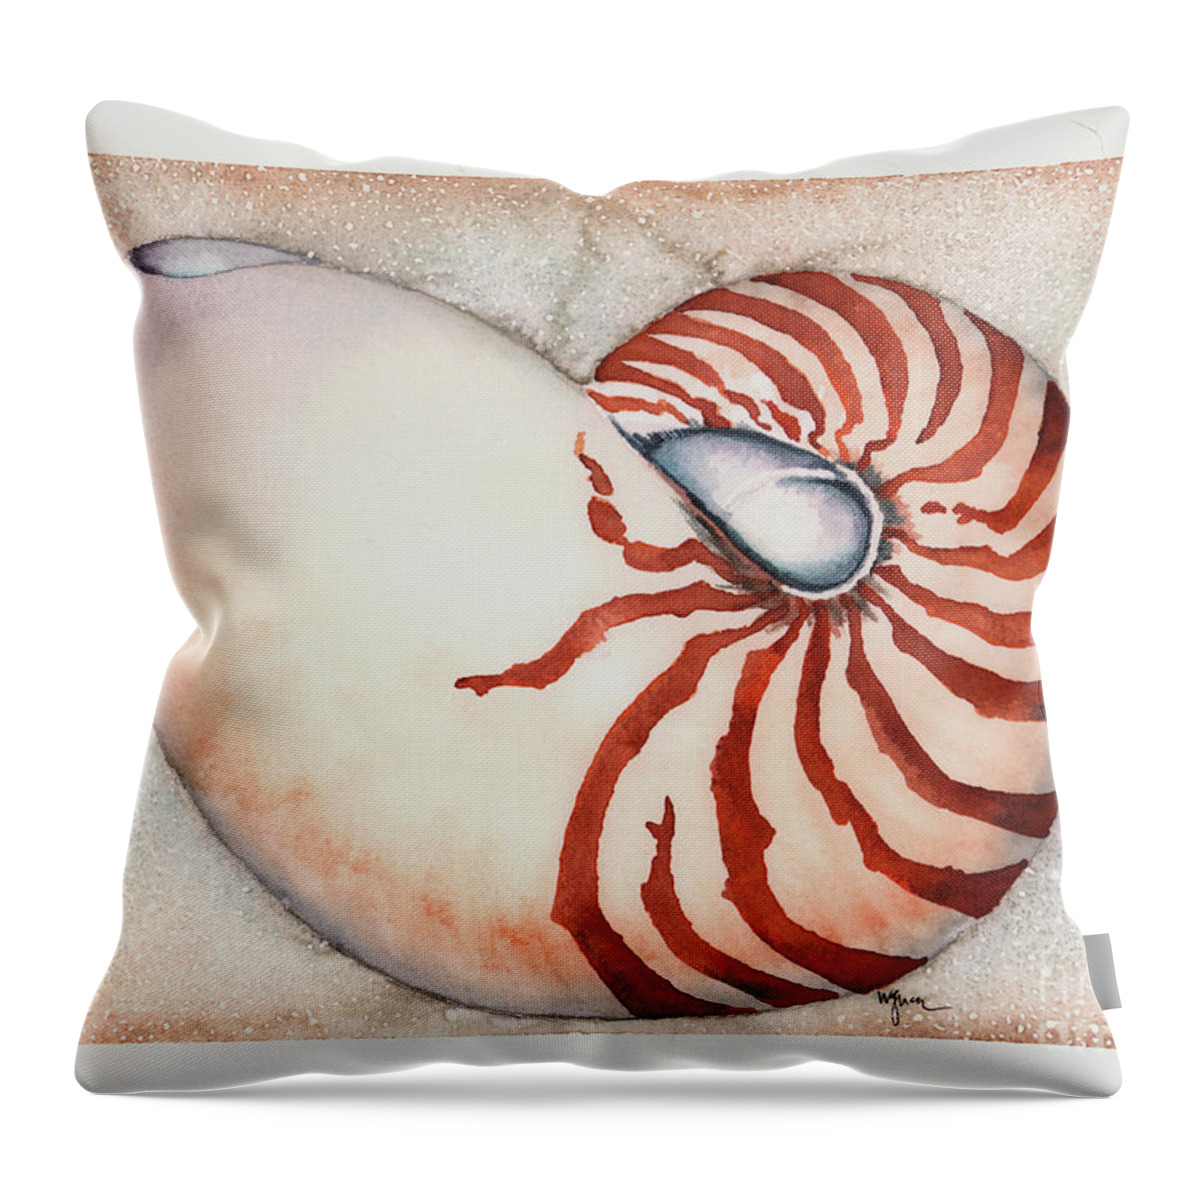 Nautilus Throw Pillow featuring the painting Curving Nautilus by Hilda Wagner